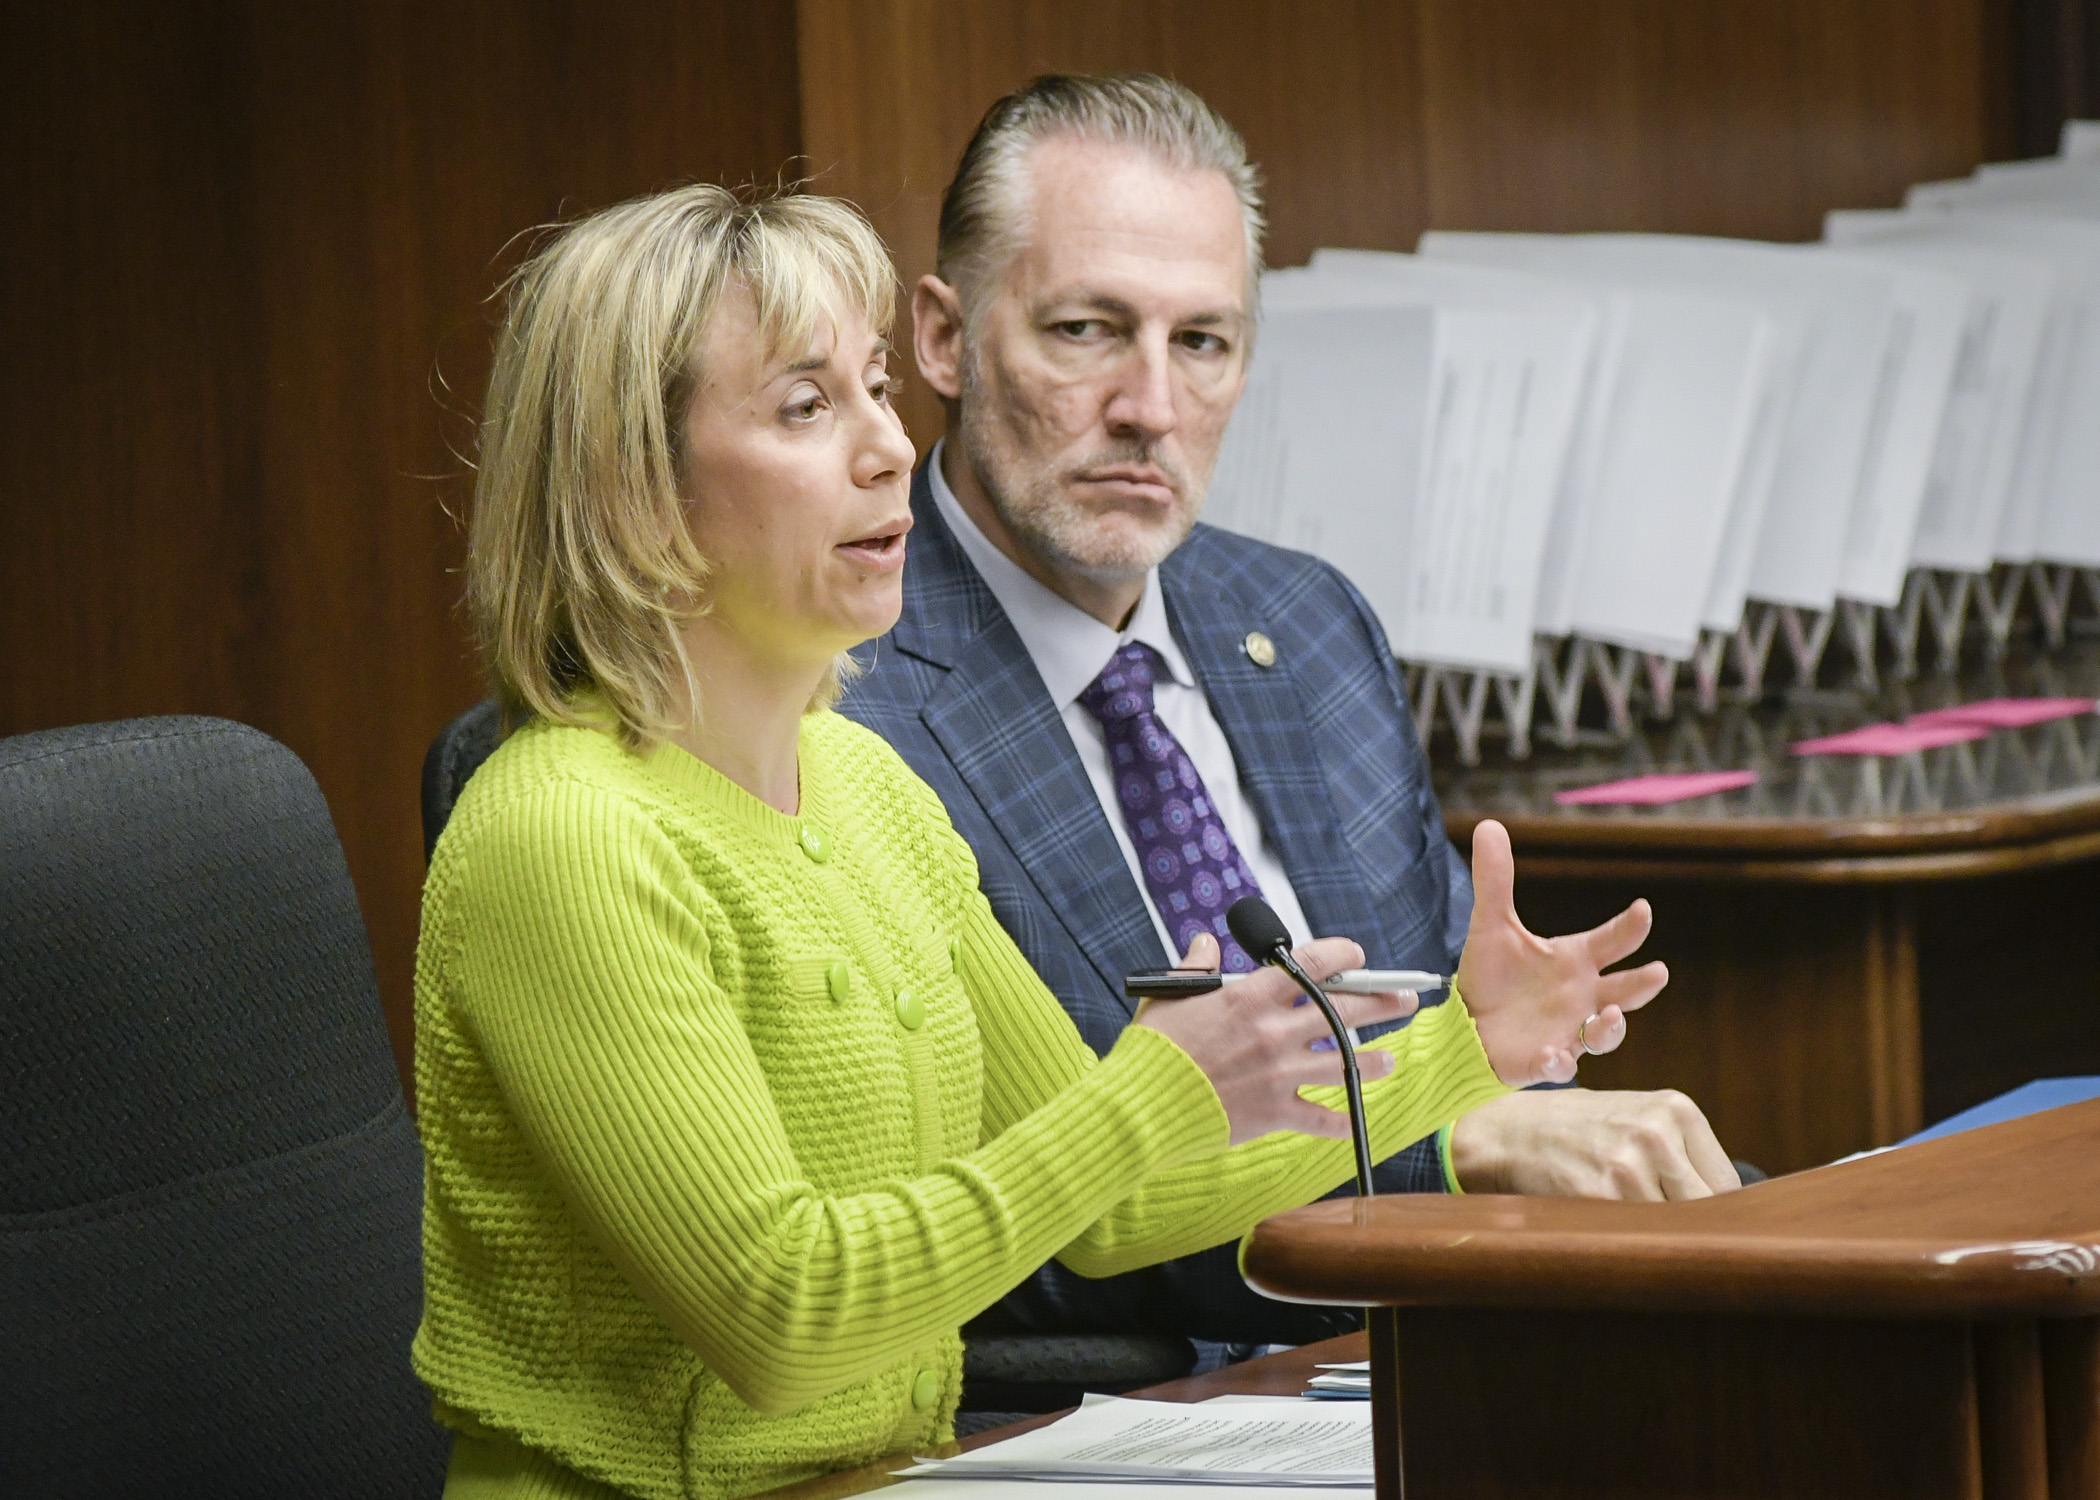 Molly Moilanen, director of Public Affairs at ClearWay Minnesota testifies before the House Health and Human Services Reform Committee March 22 in support of a bill sponsored by Rep. Dario Anselmo, right, to continue funding tobacco cessation services. Photo by Andrew VonBank